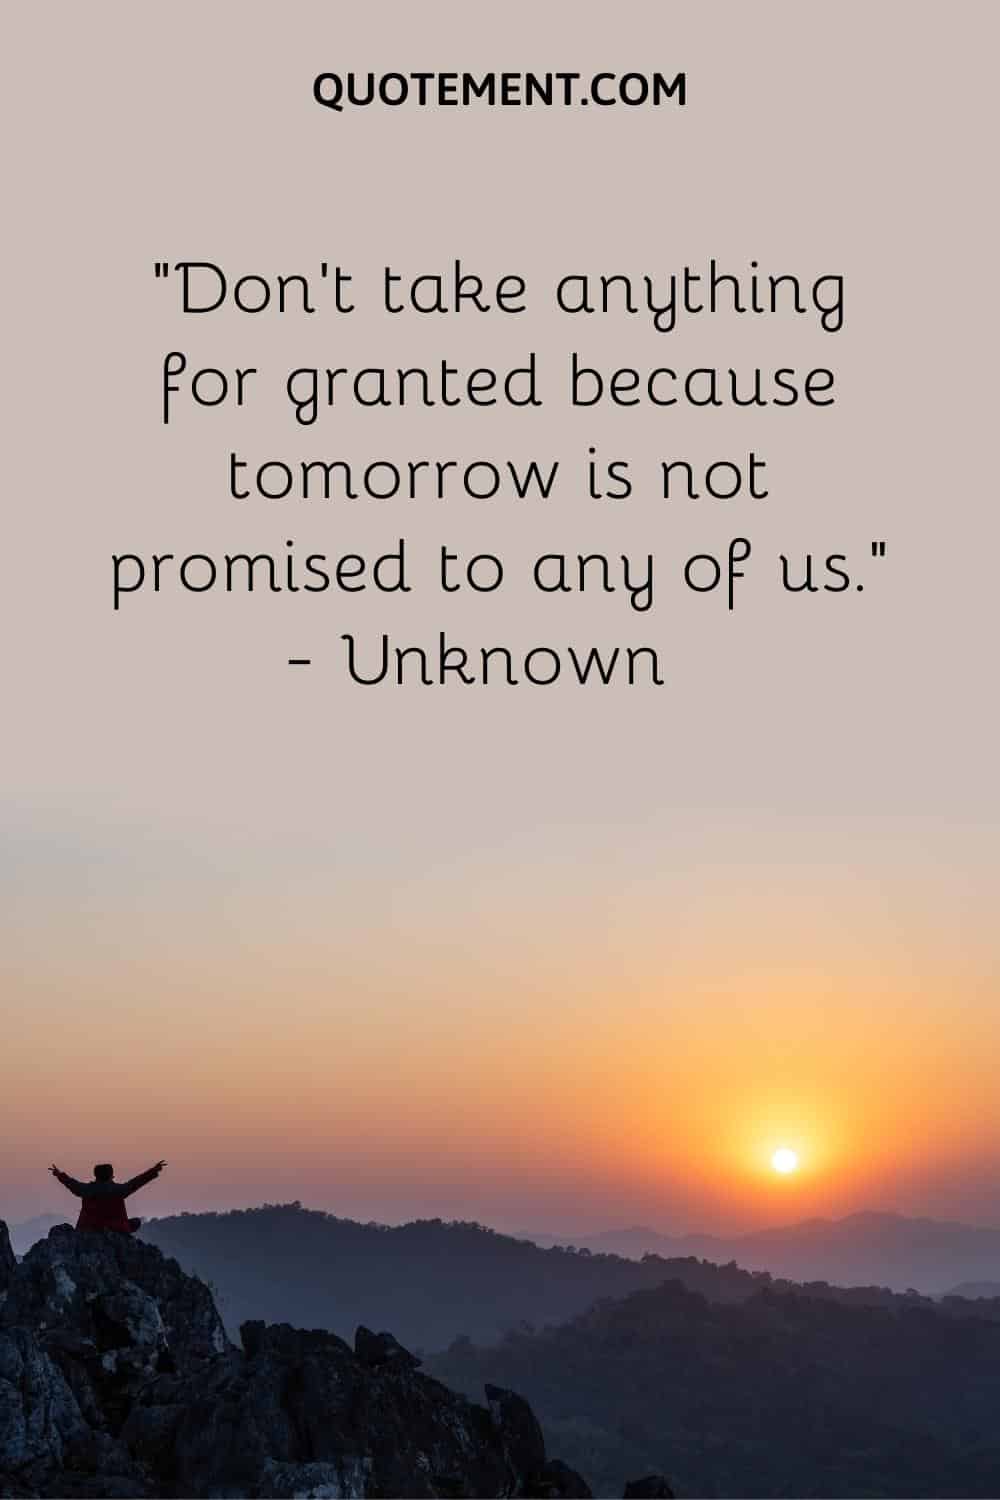 Don’t take anything for granted because tomorrow is not promised to any of us